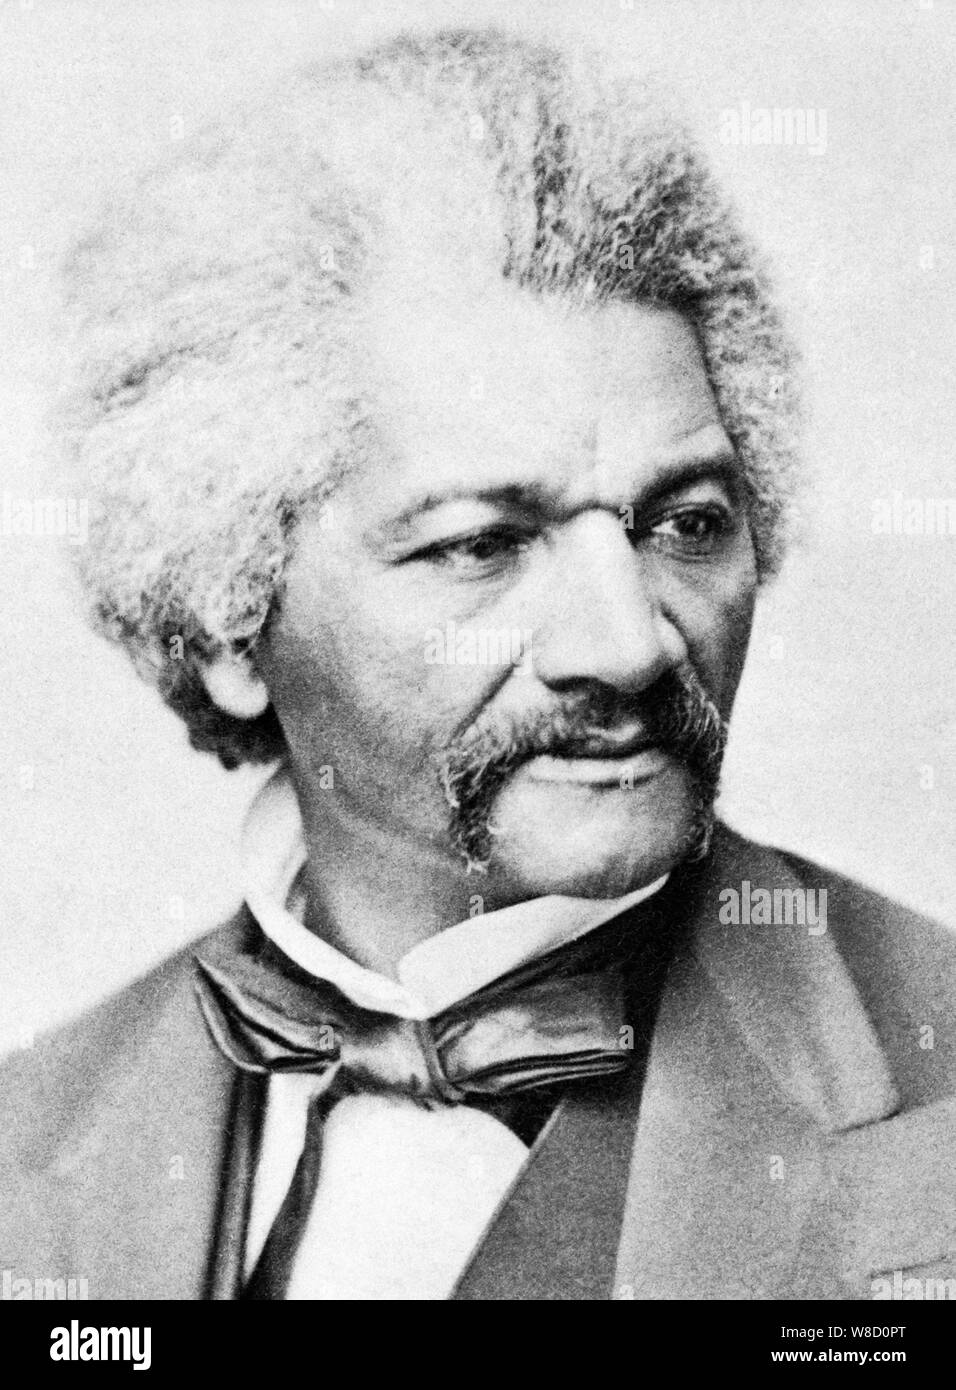 Vintage head and shoulders portrait photo of American social reformer, abolitionist, orator, writer and statesman Frederick Douglass (born Frederick Augustus Washington Bailey) (c1818 – 1895). Photo circa 1870 by George Francis Schreiber. Stock Photo